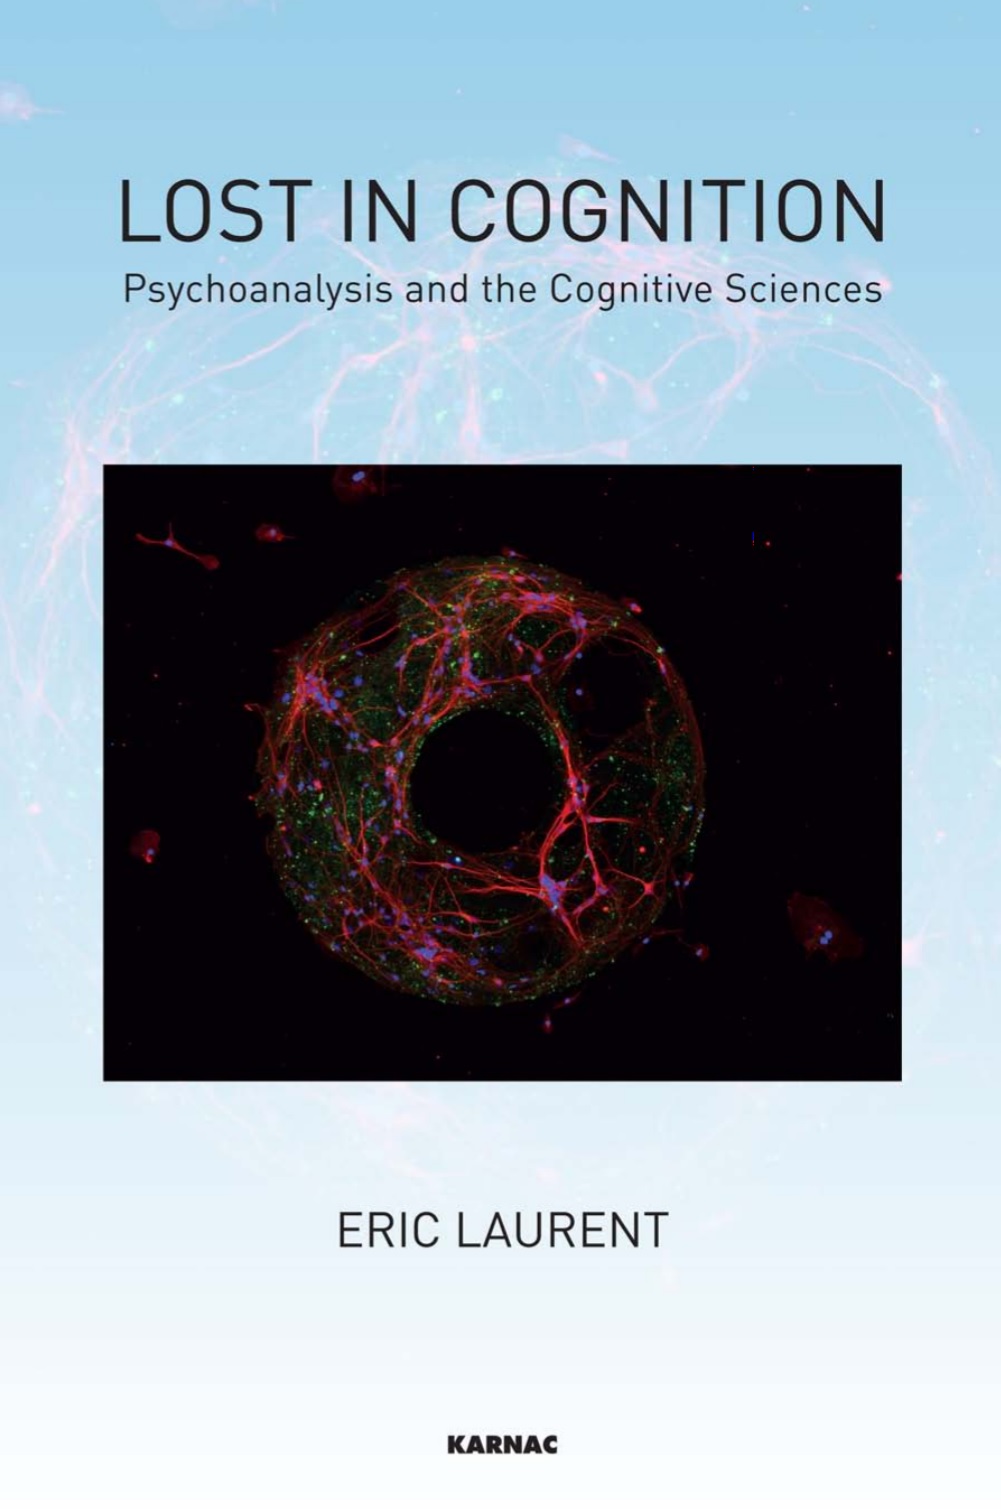 Eric-laurent-lost-in-cognition-psychoanalysis-and-cognitive-sciences-theoryleaks.jpg